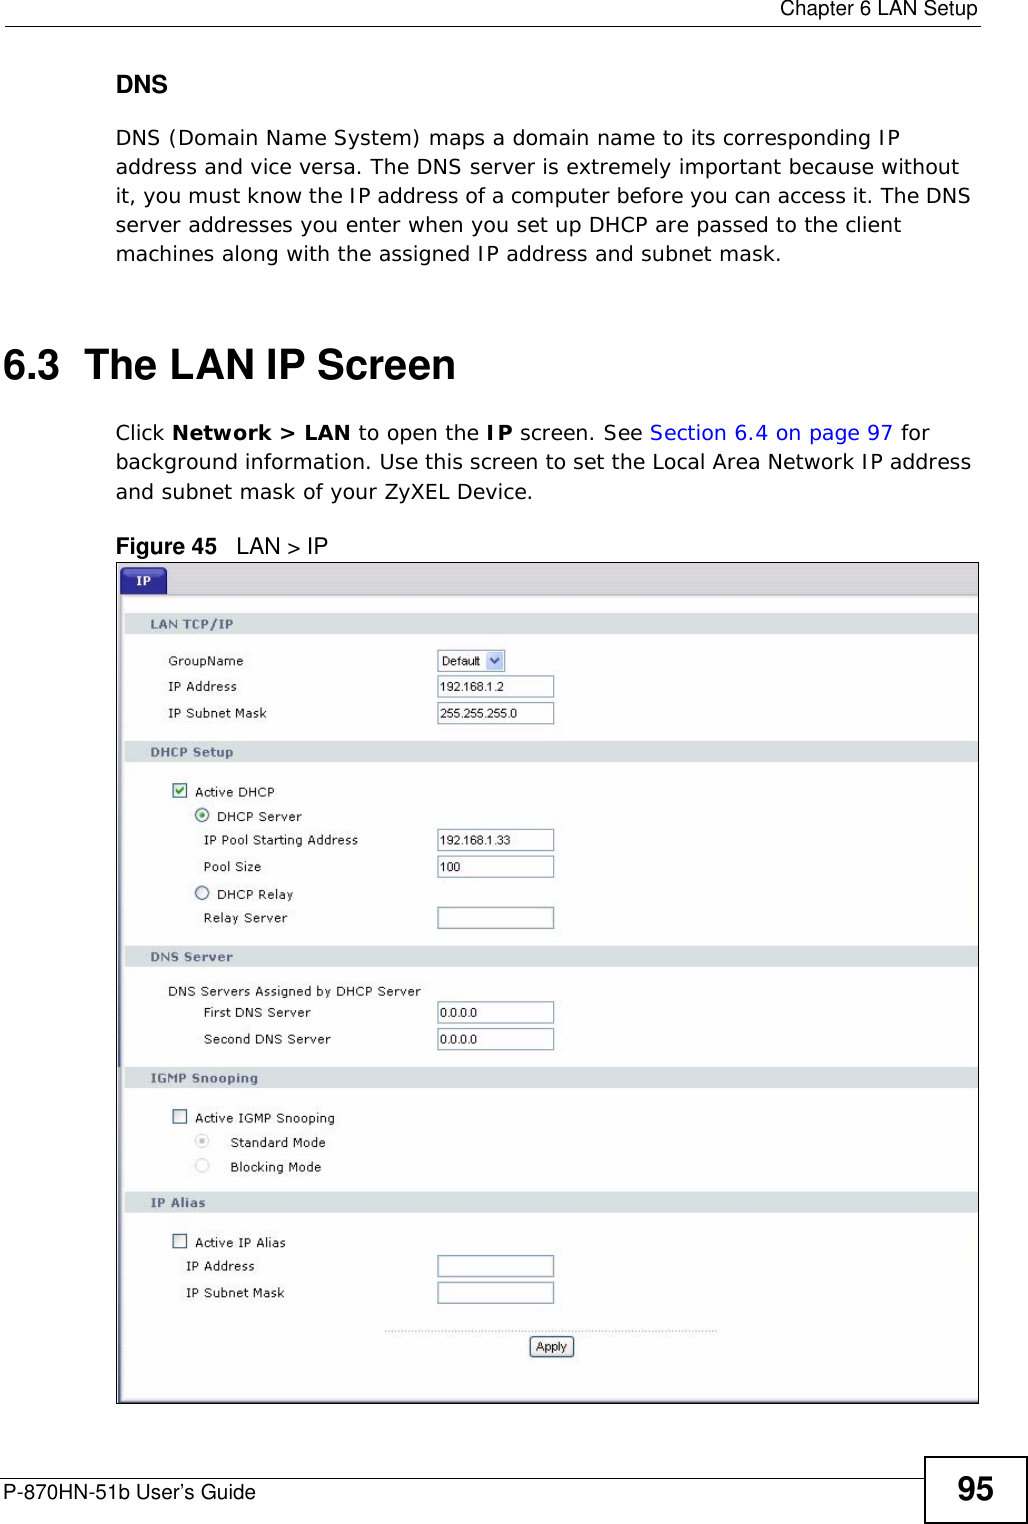  Chapter 6 LAN SetupP-870HN-51b User’s Guide 95DNSDNS (Domain Name System) maps a domain name to its corresponding IP address and vice versa. The DNS server is extremely important because without it, you must know the IP address of a computer before you can access it. The DNS server addresses you enter when you set up DHCP are passed to the client machines along with the assigned IP address and subnet mask.6.3  The LAN IP Screen Click Network &gt; LAN to open the IP screen. See Section 6.4 on page 97 for background information. Use this screen to set the Local Area Network IP address and subnet mask of your ZyXEL Device.Figure 45   LAN &gt; IP